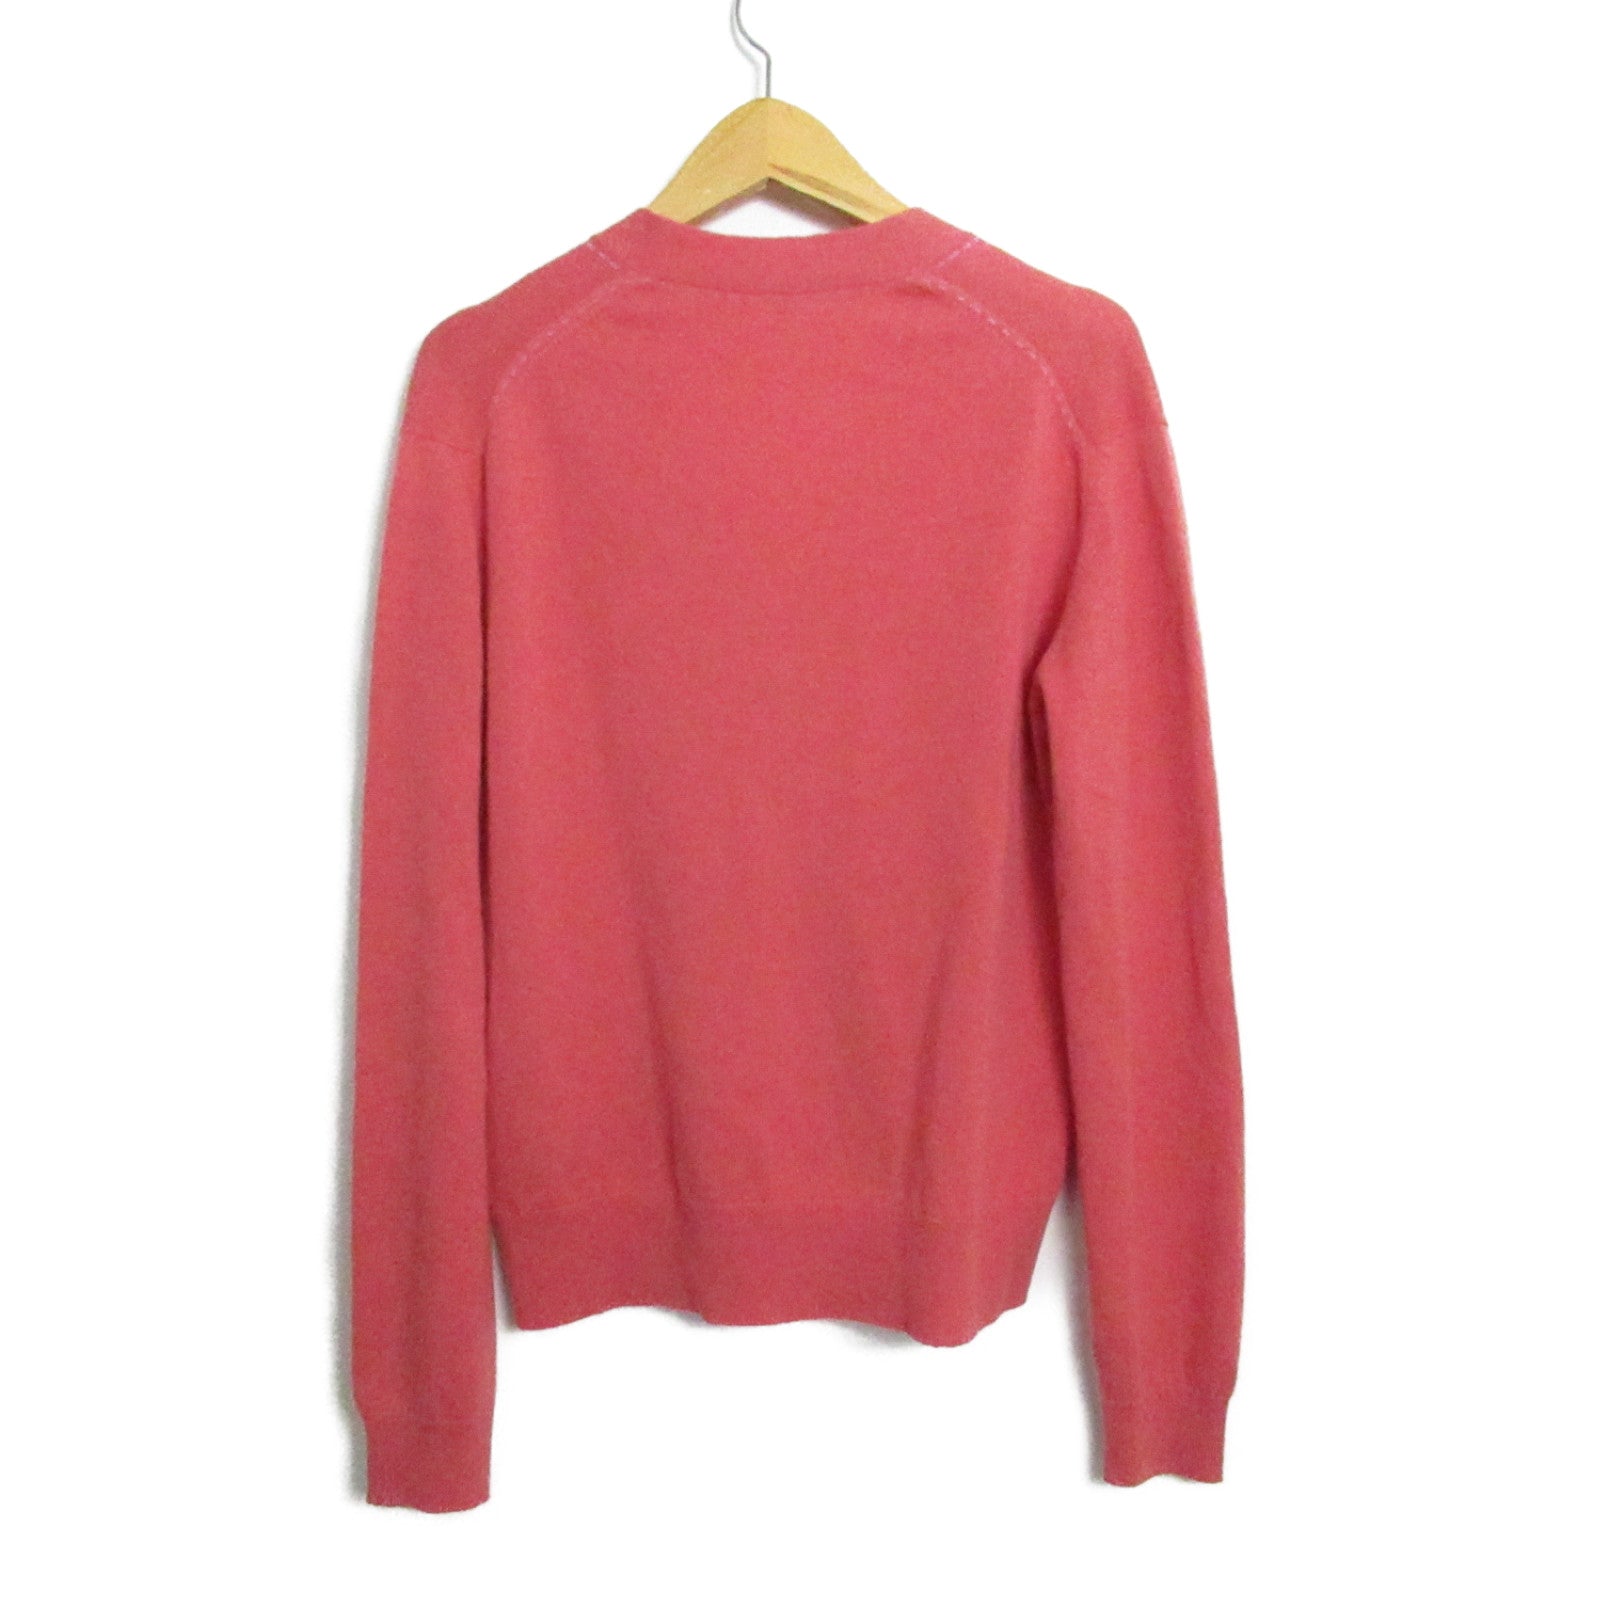 Hermes Hermes Cardigan  Tops Cashmere  Pink Collection